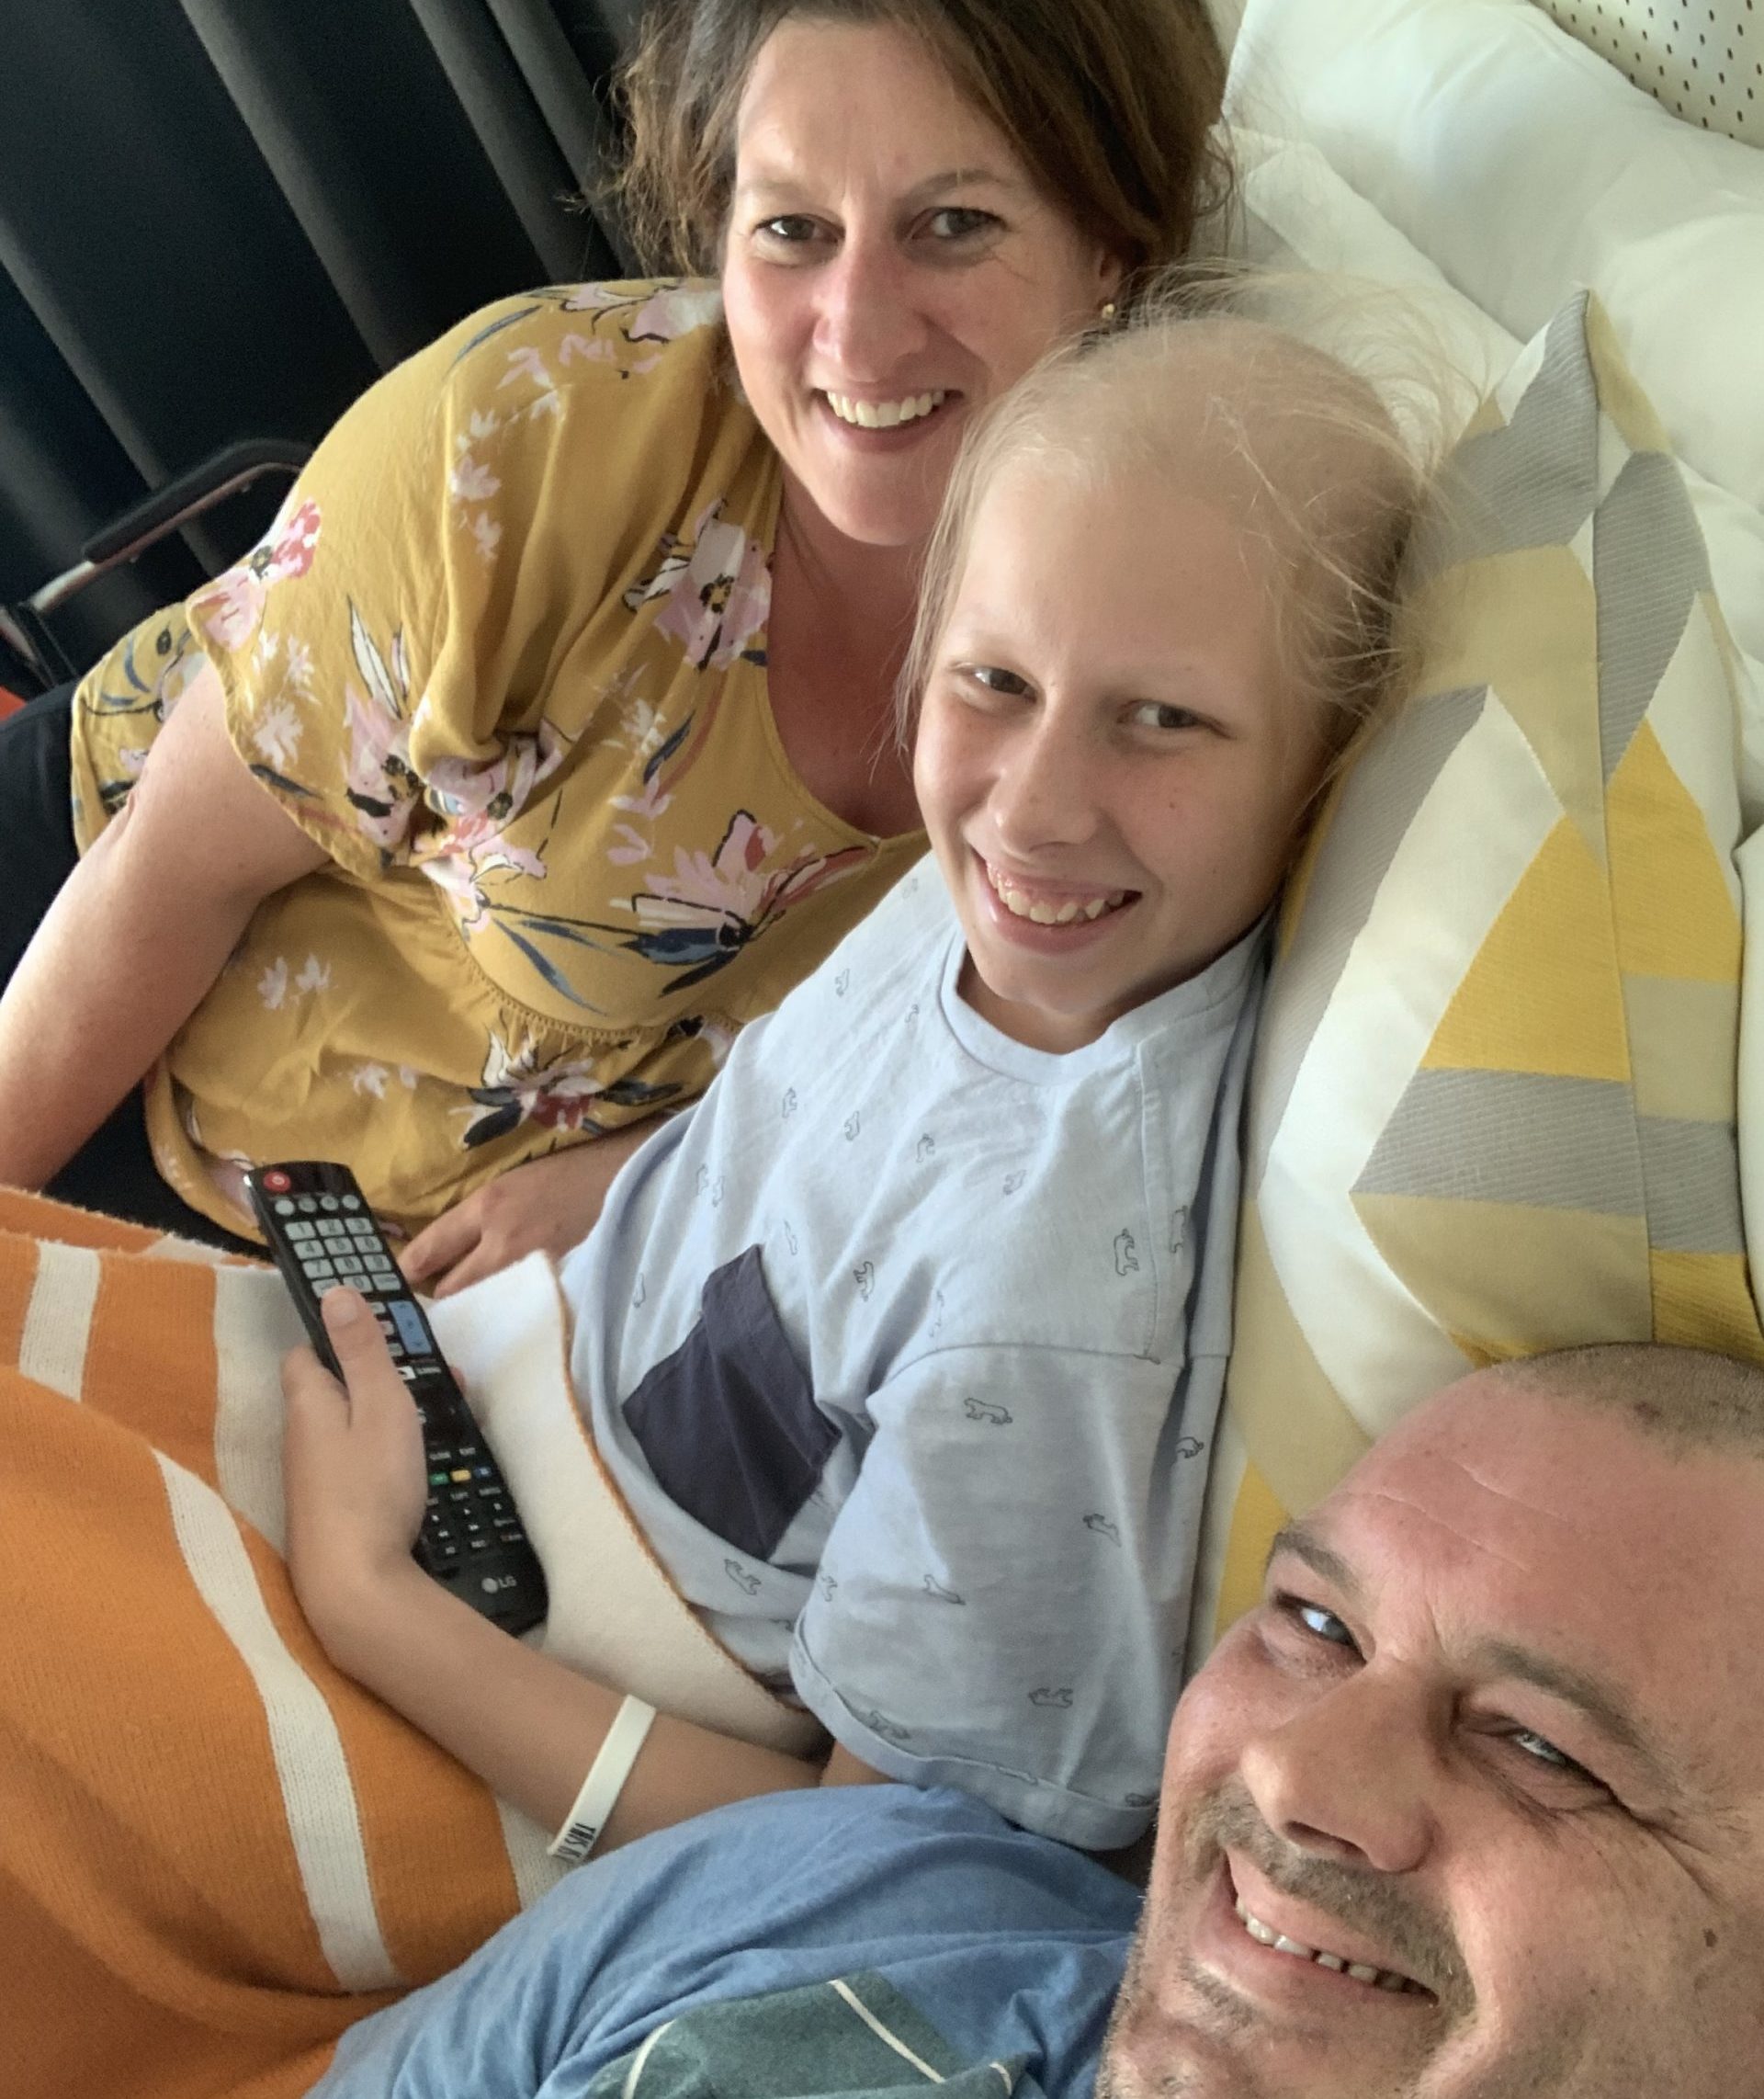 A smiling young teen boy in a hospital bed, with his parents on either side of him